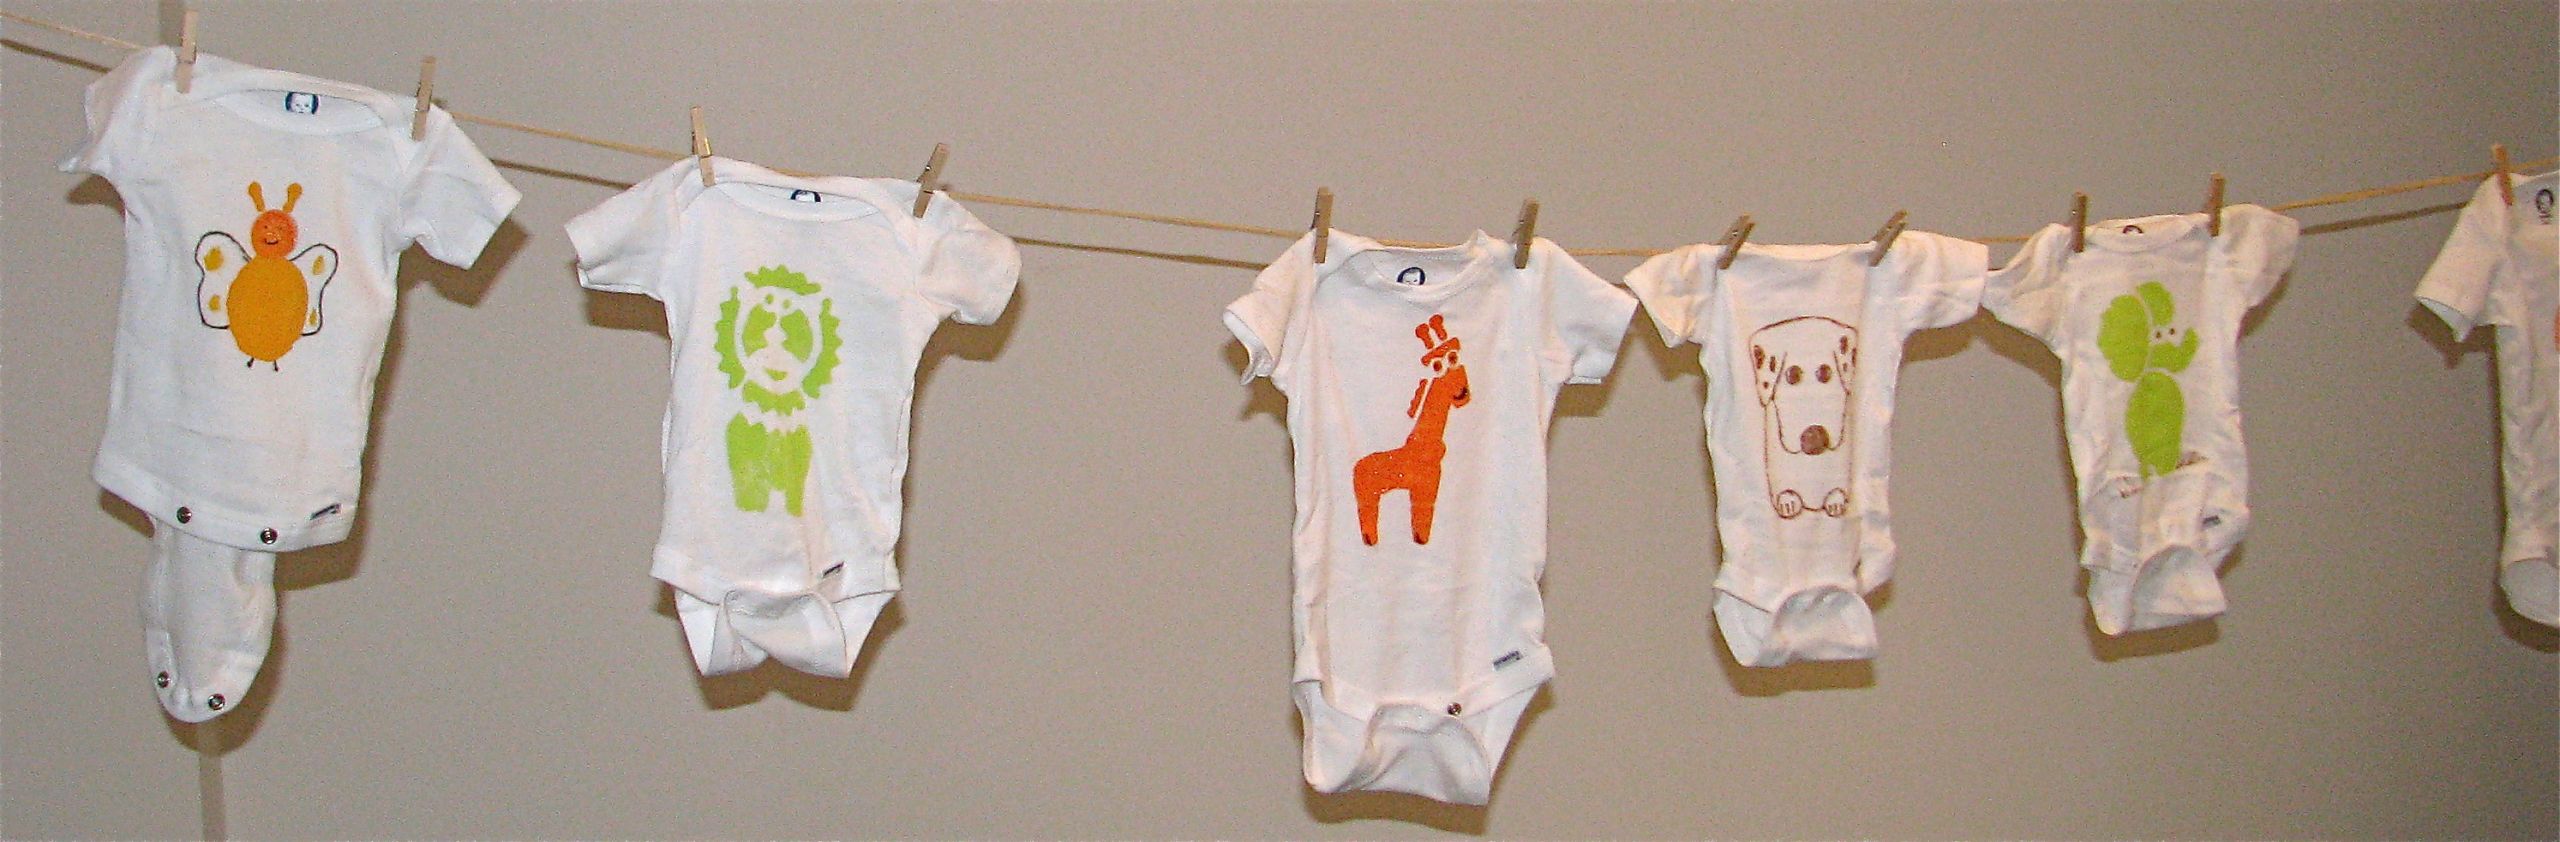 Baby Onesie Ideas For Decorating
 Decorate esies baby shower ideas